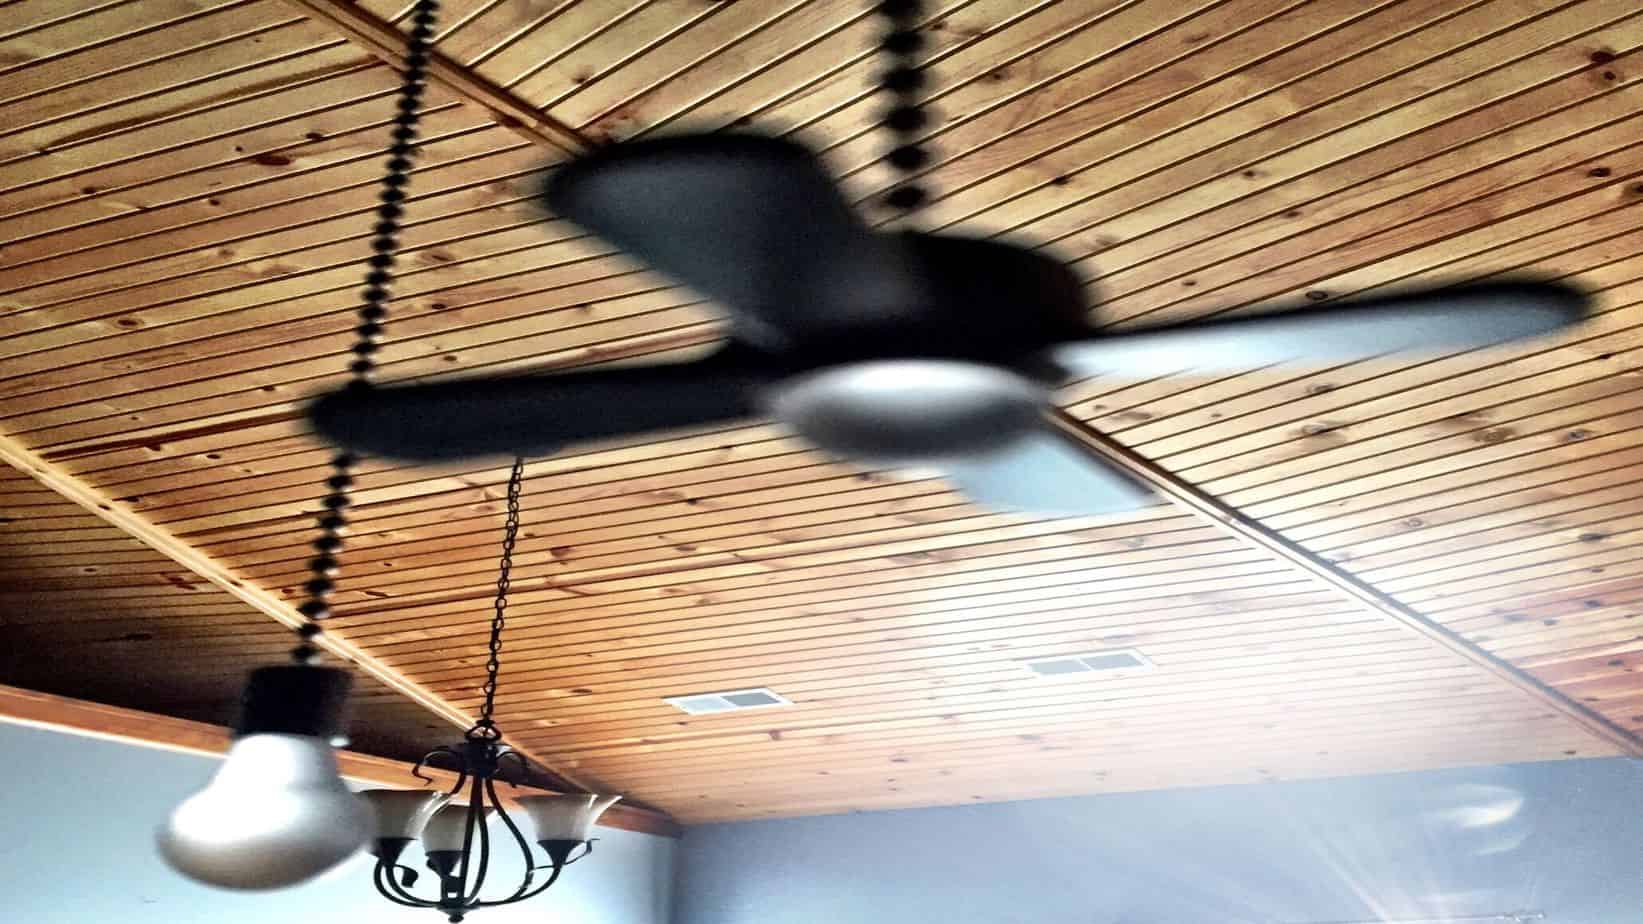 How Does A Ceiling Fan Cool The Room?